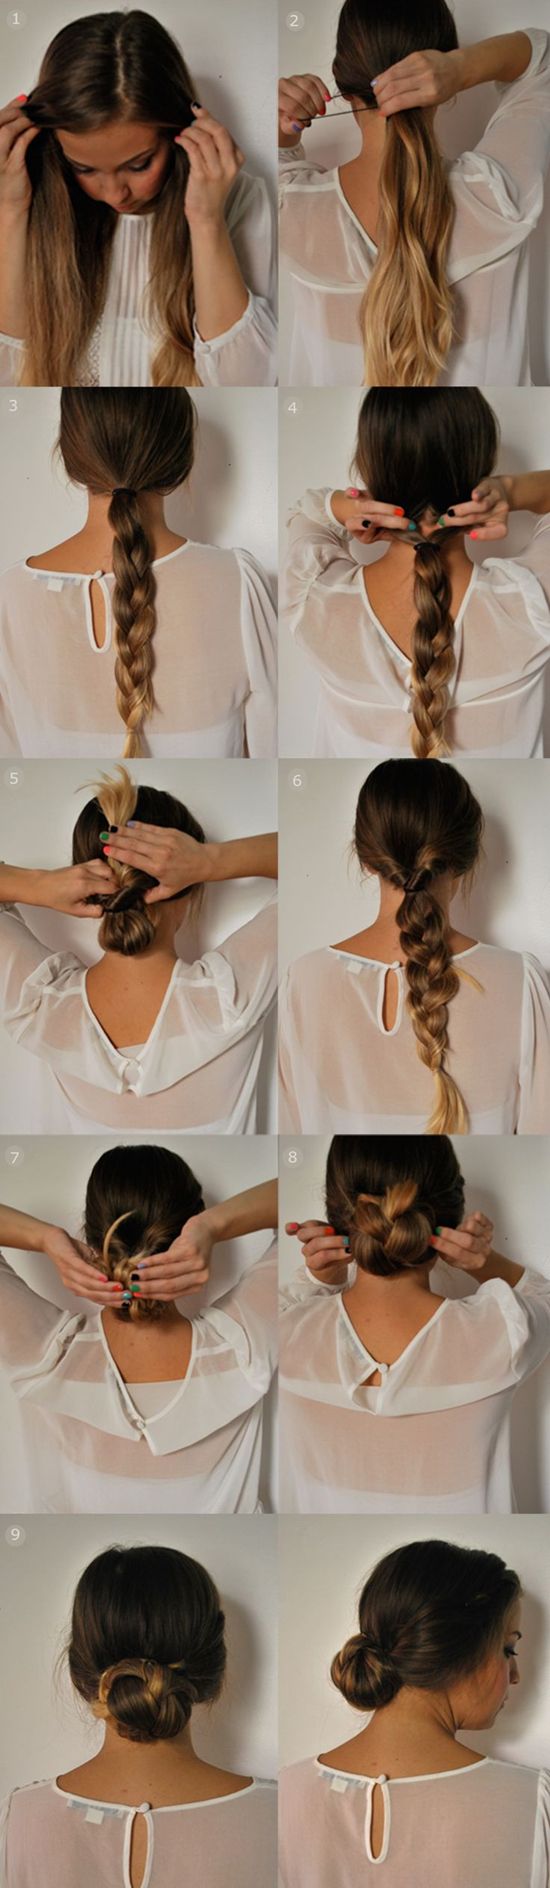 Quick 5 minutes updo braided ponytail updo